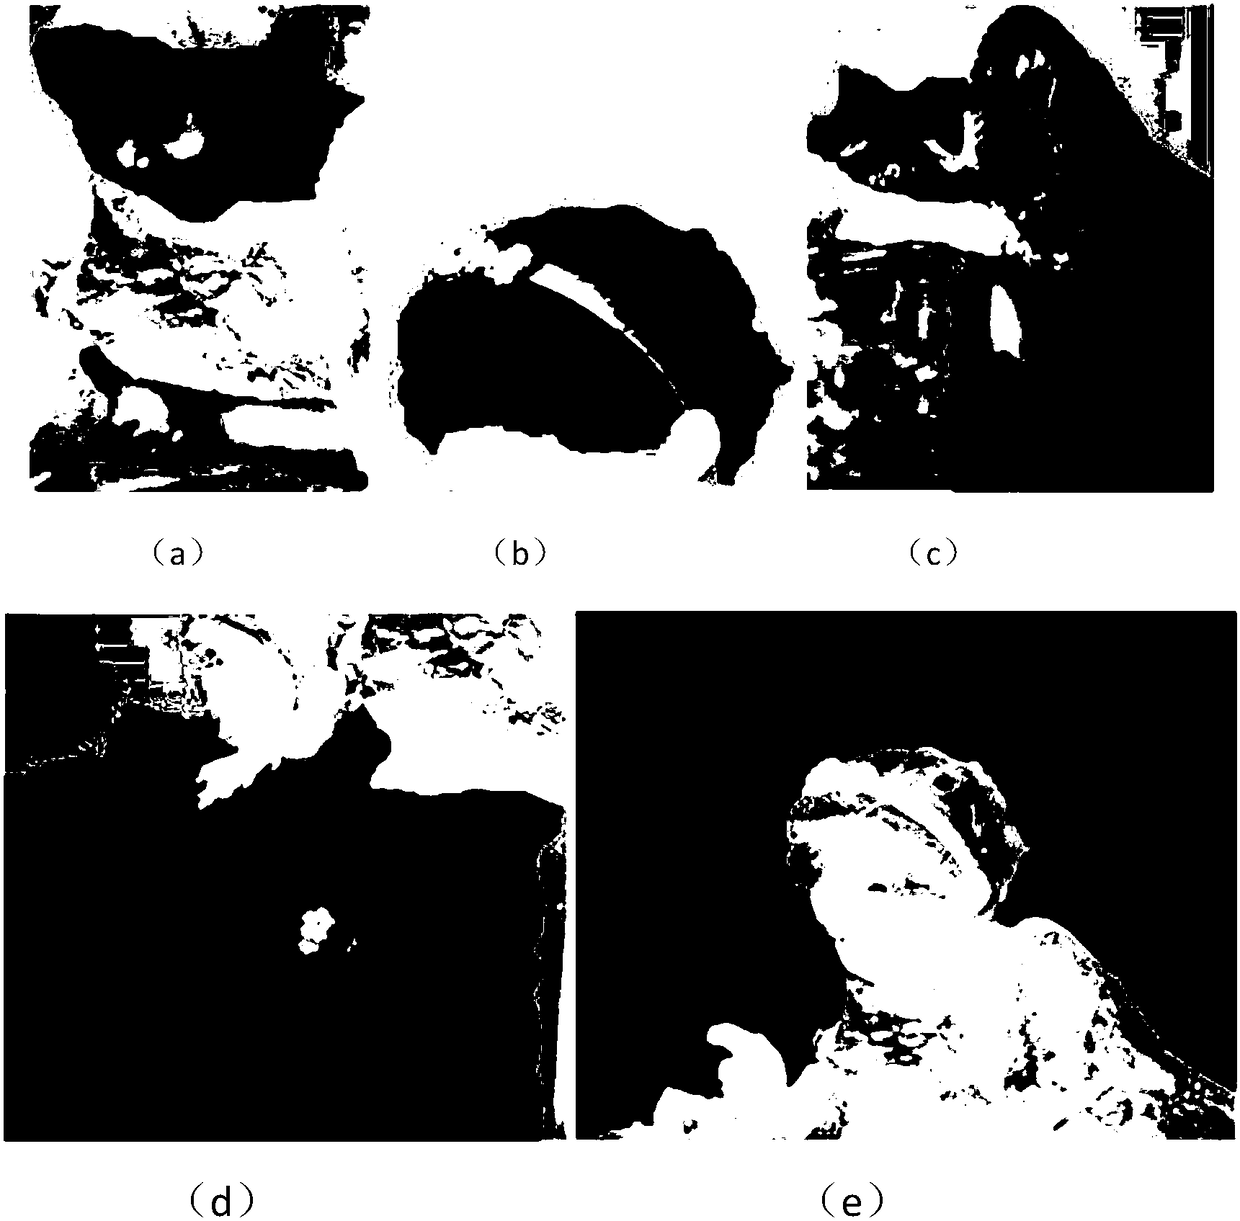 An Artistic Stylized Image Processing Method